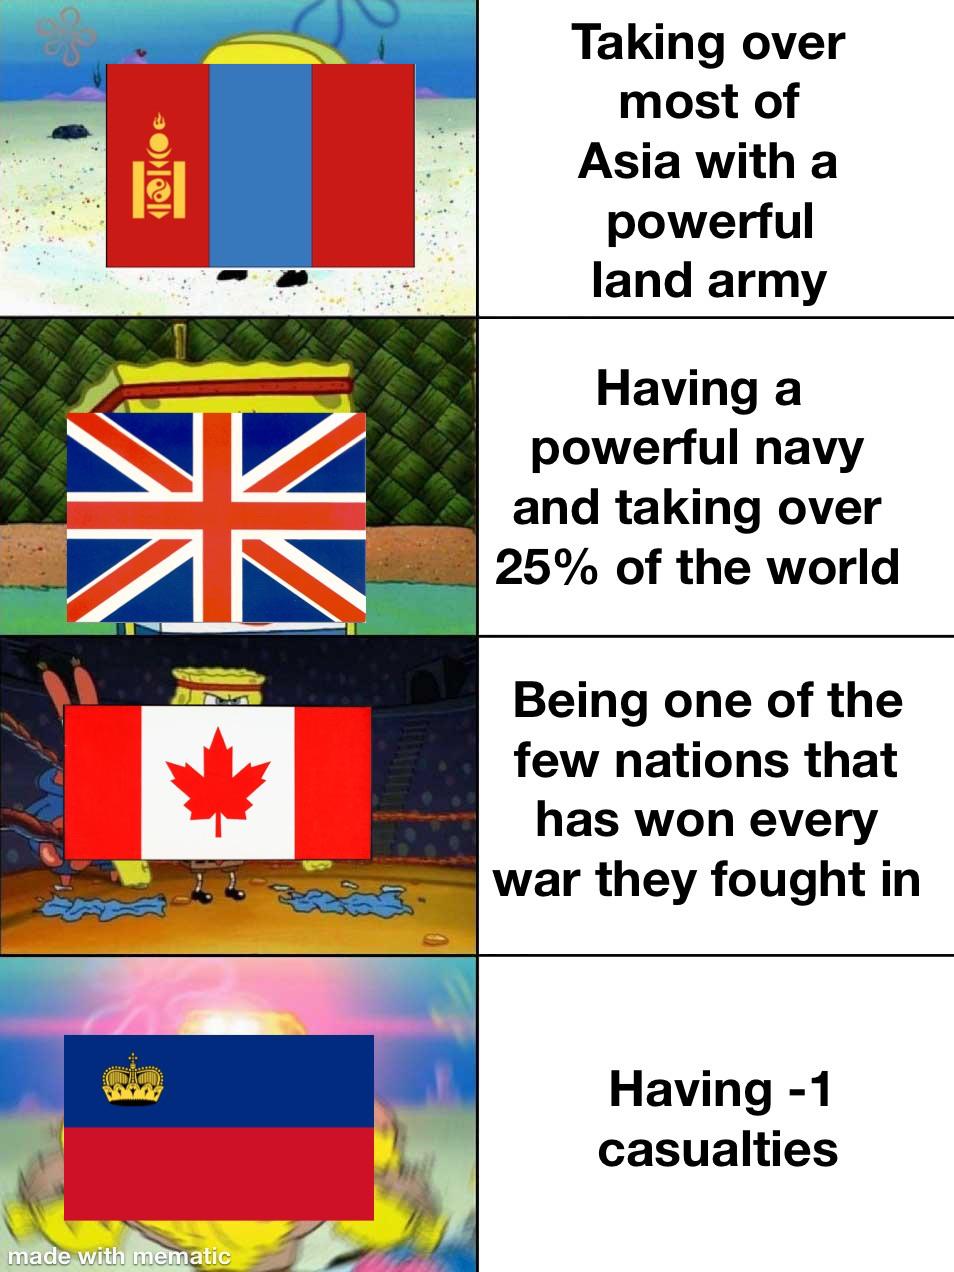 History, Canada, Canadian, Afghanistan, Norway, Korea History Memes History, Canada, Canadian, Afghanistan, Norway, Korea text: Taking over most of Asia with a powerful land army Having a powerful navy and taking over 25% of the world Being one of the few nations that has won every war they fought in Having -1 casualties åée with atl 